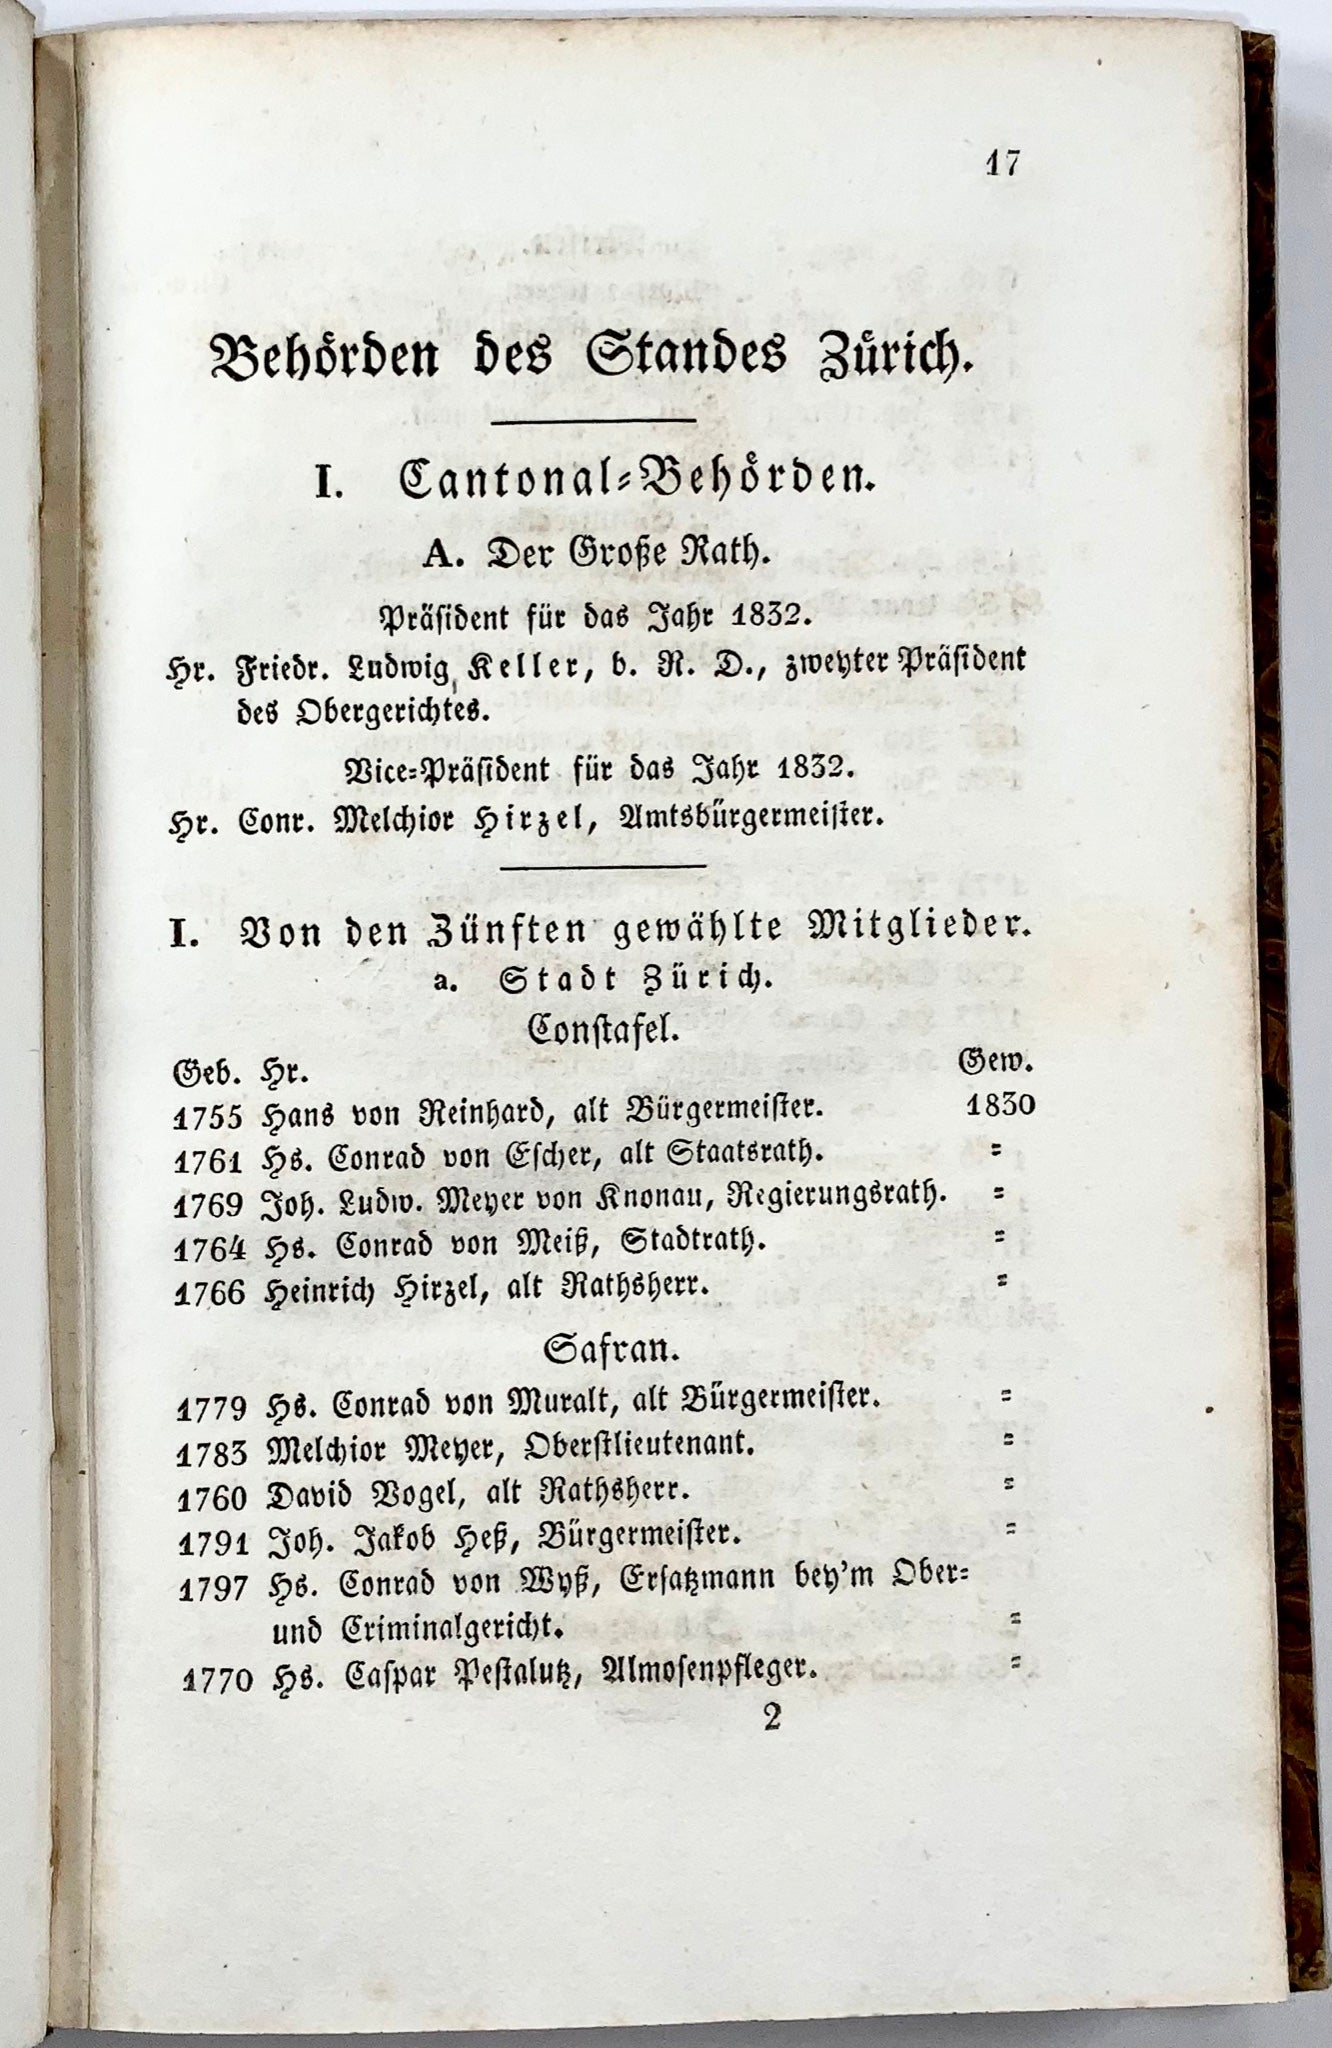 1832 Swiss directory of public servants for the Canton of Zurich, book